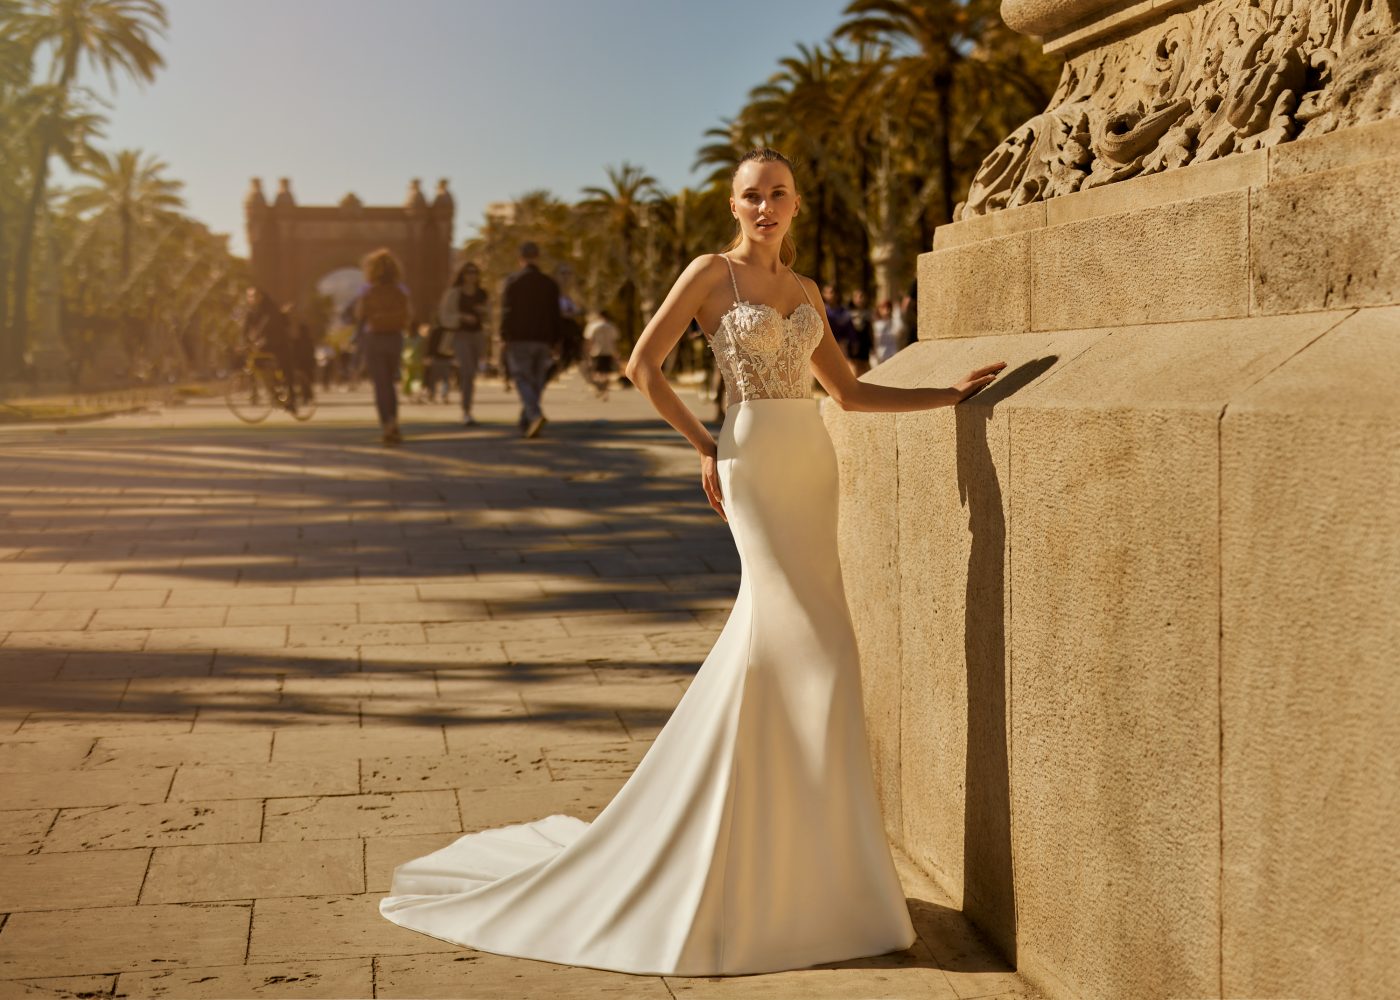 Beautiful & Budget: Where to Find Second Hand Wedding Dresses